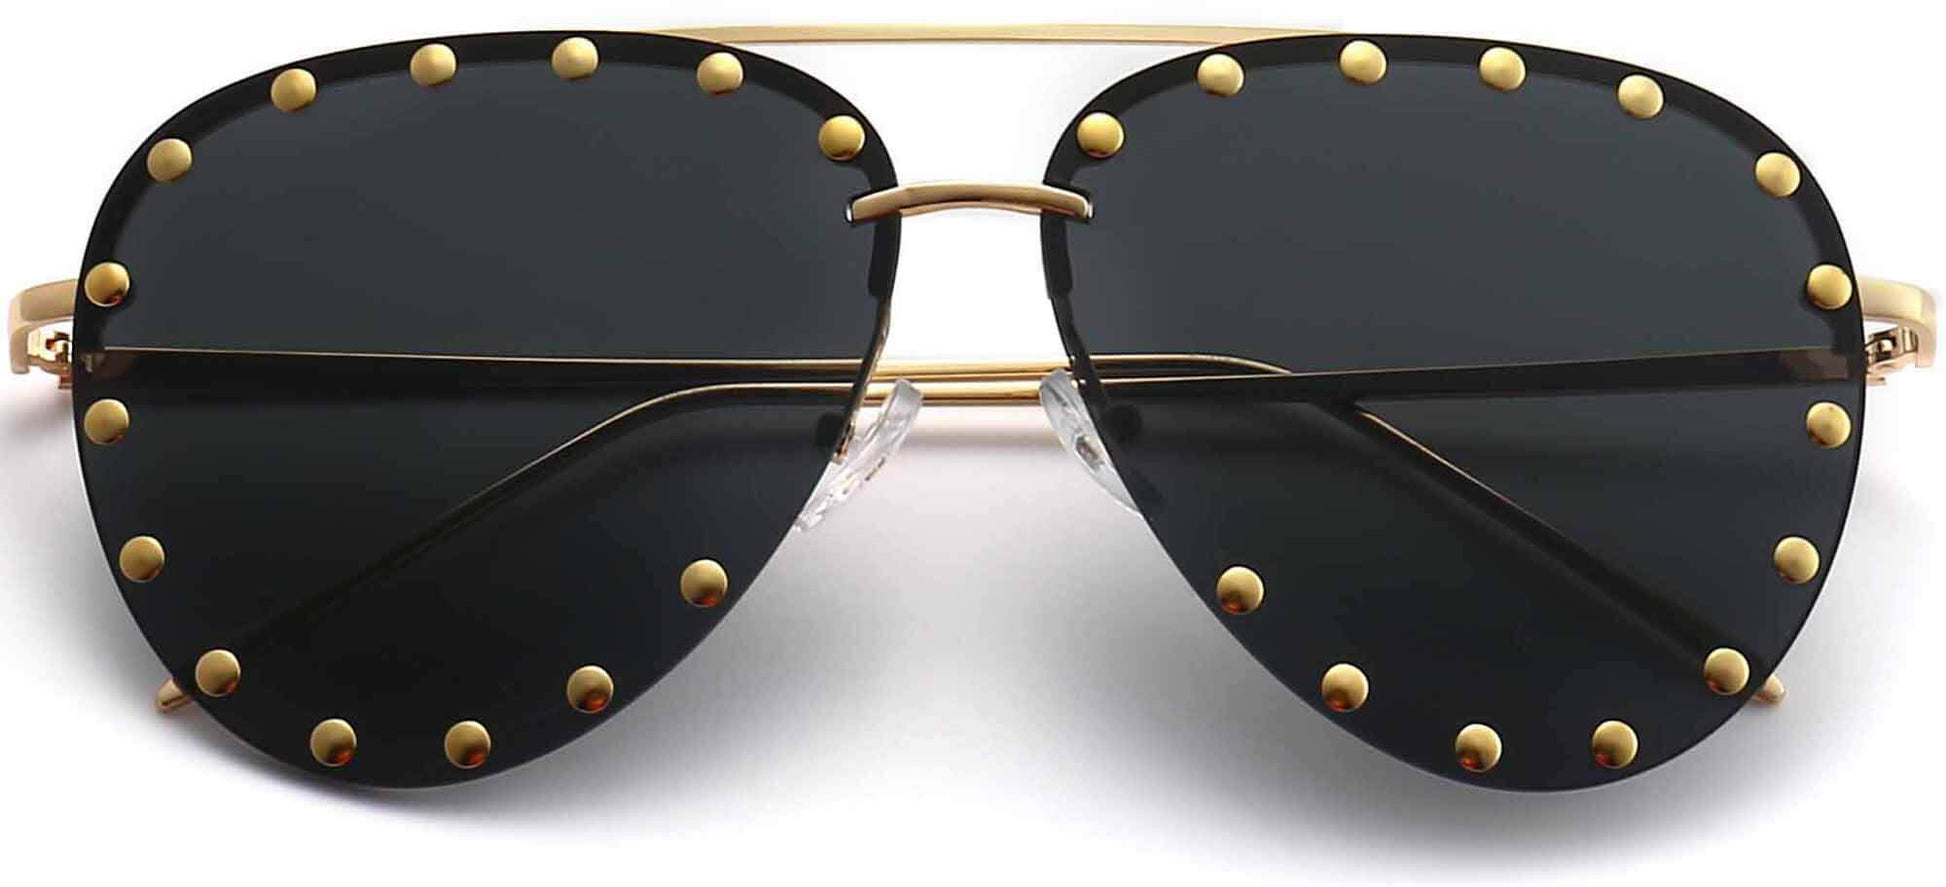 Allison Gold Stainless steel Sunglasses from ANRRI, closed view